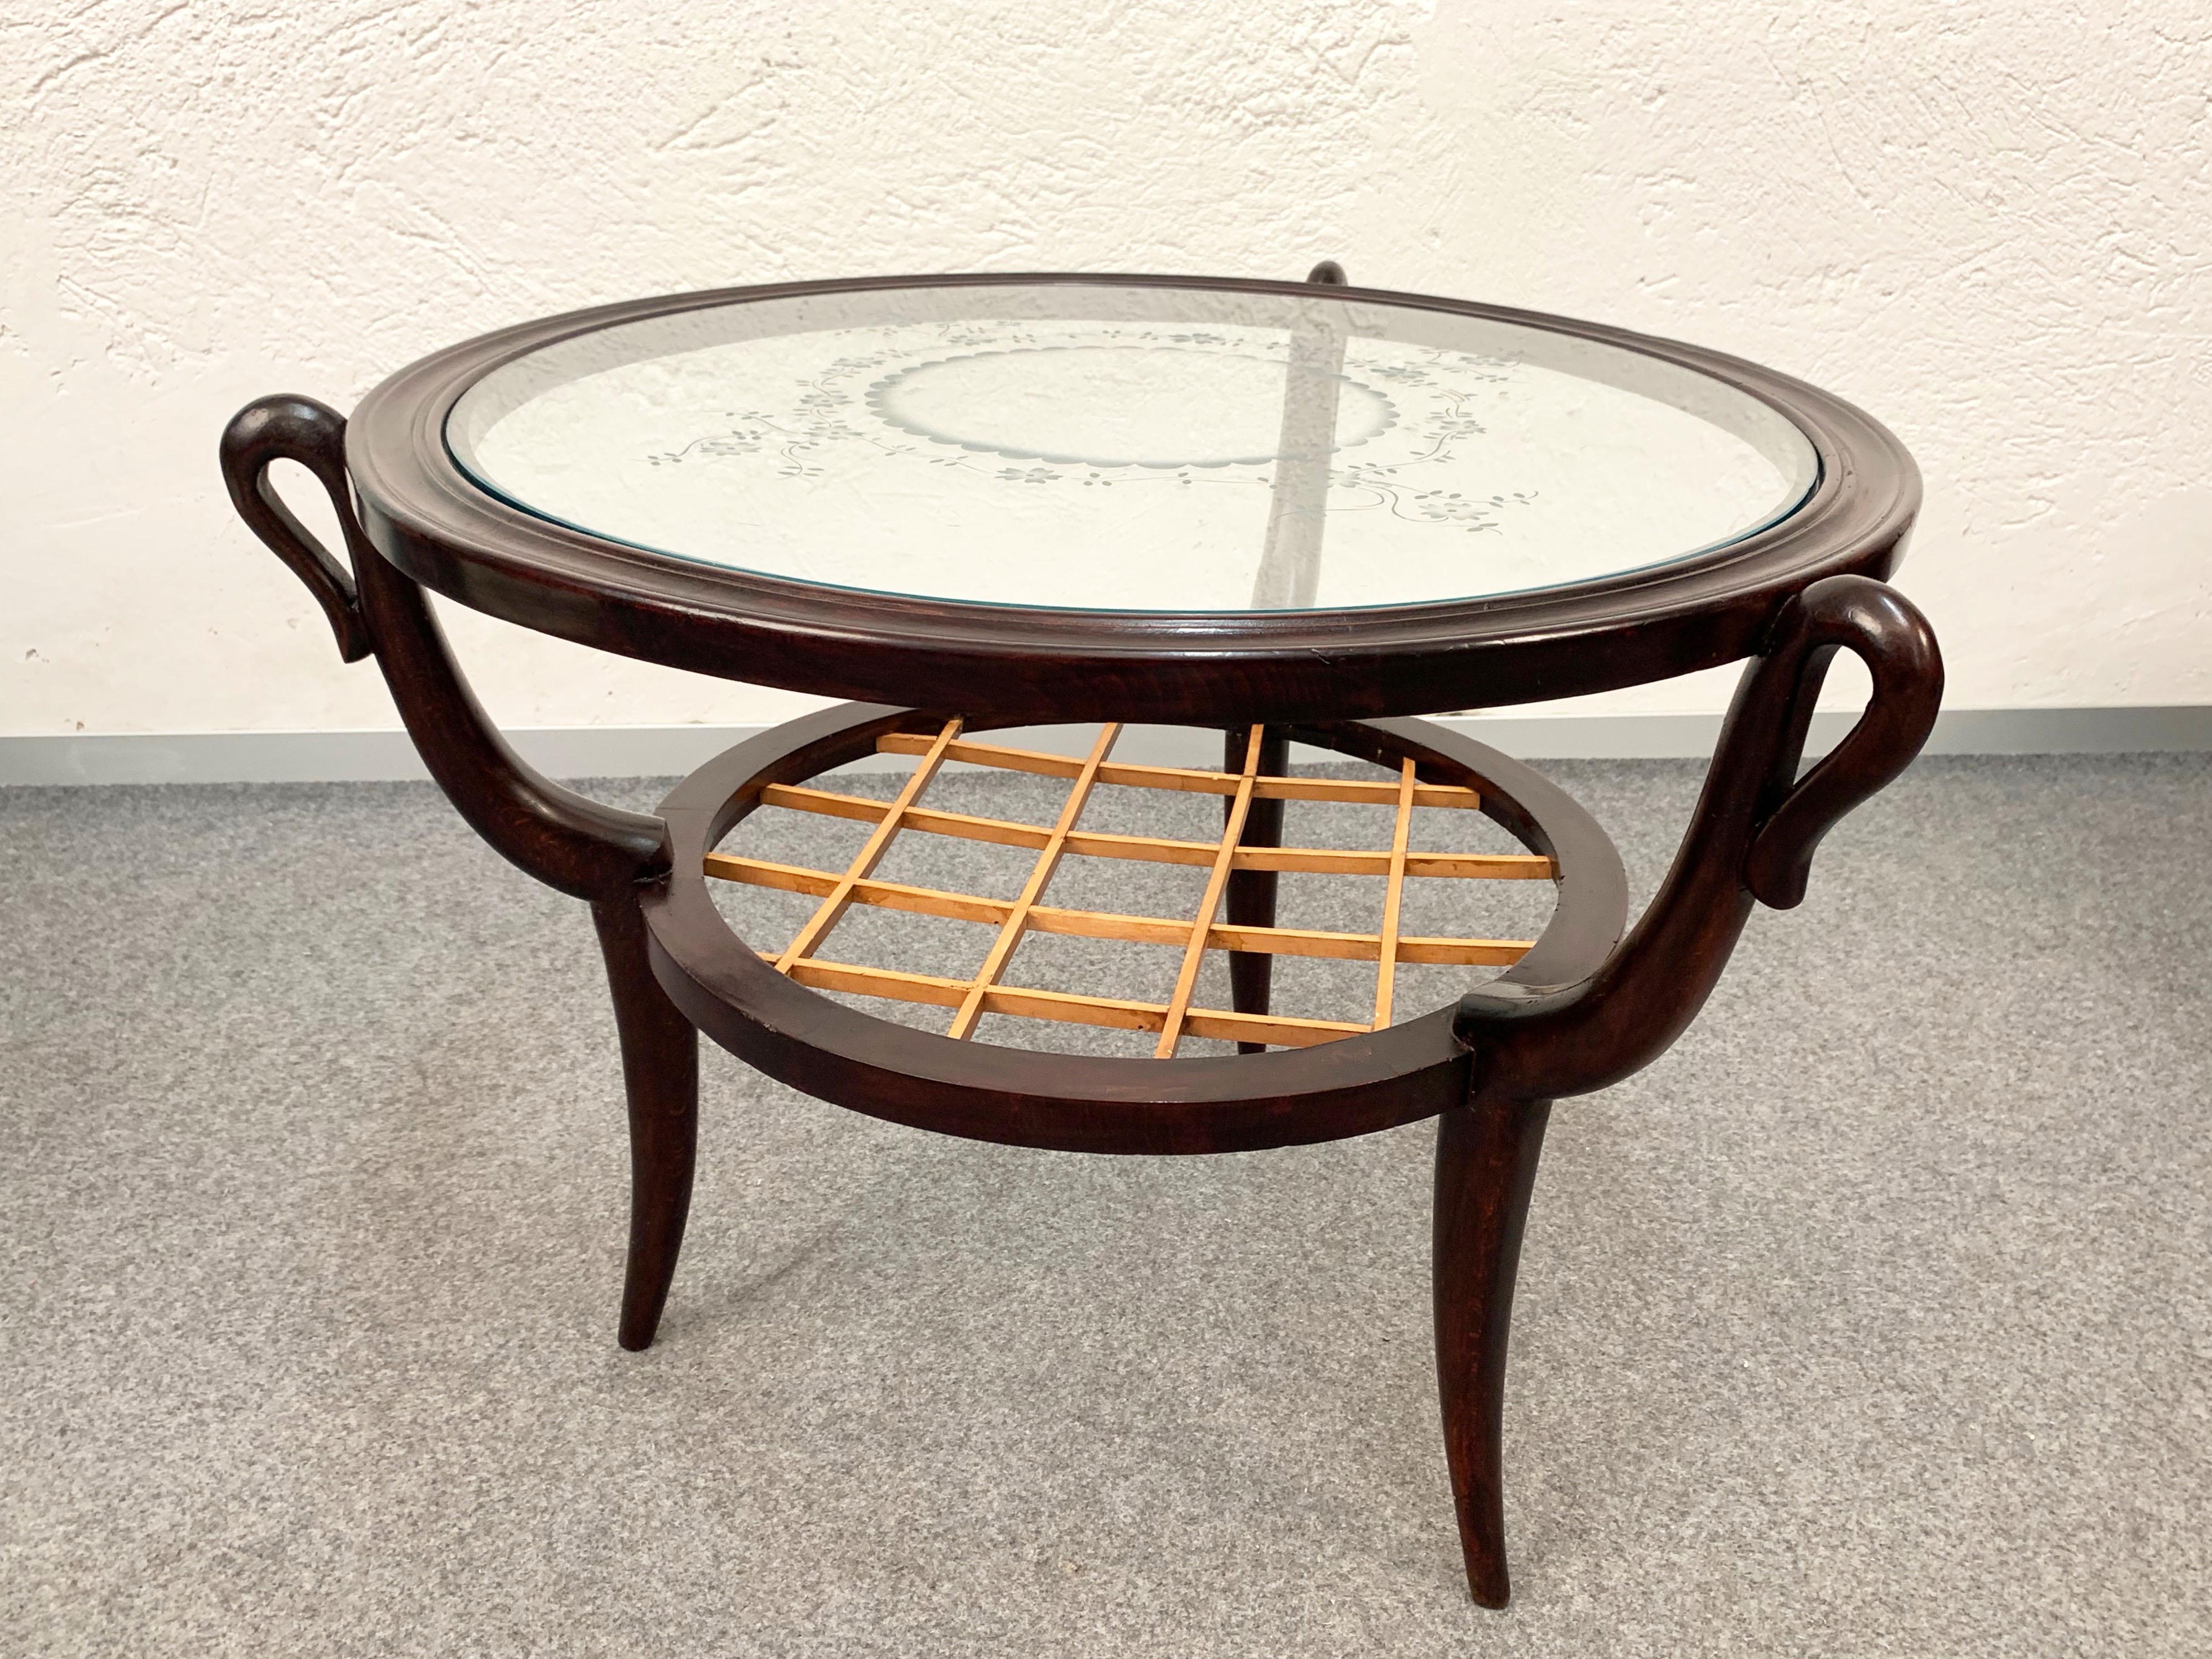 Two-level Round Wood and Glass Italian Coffee Table Gio Ponti Style, 1950s For Sale 2